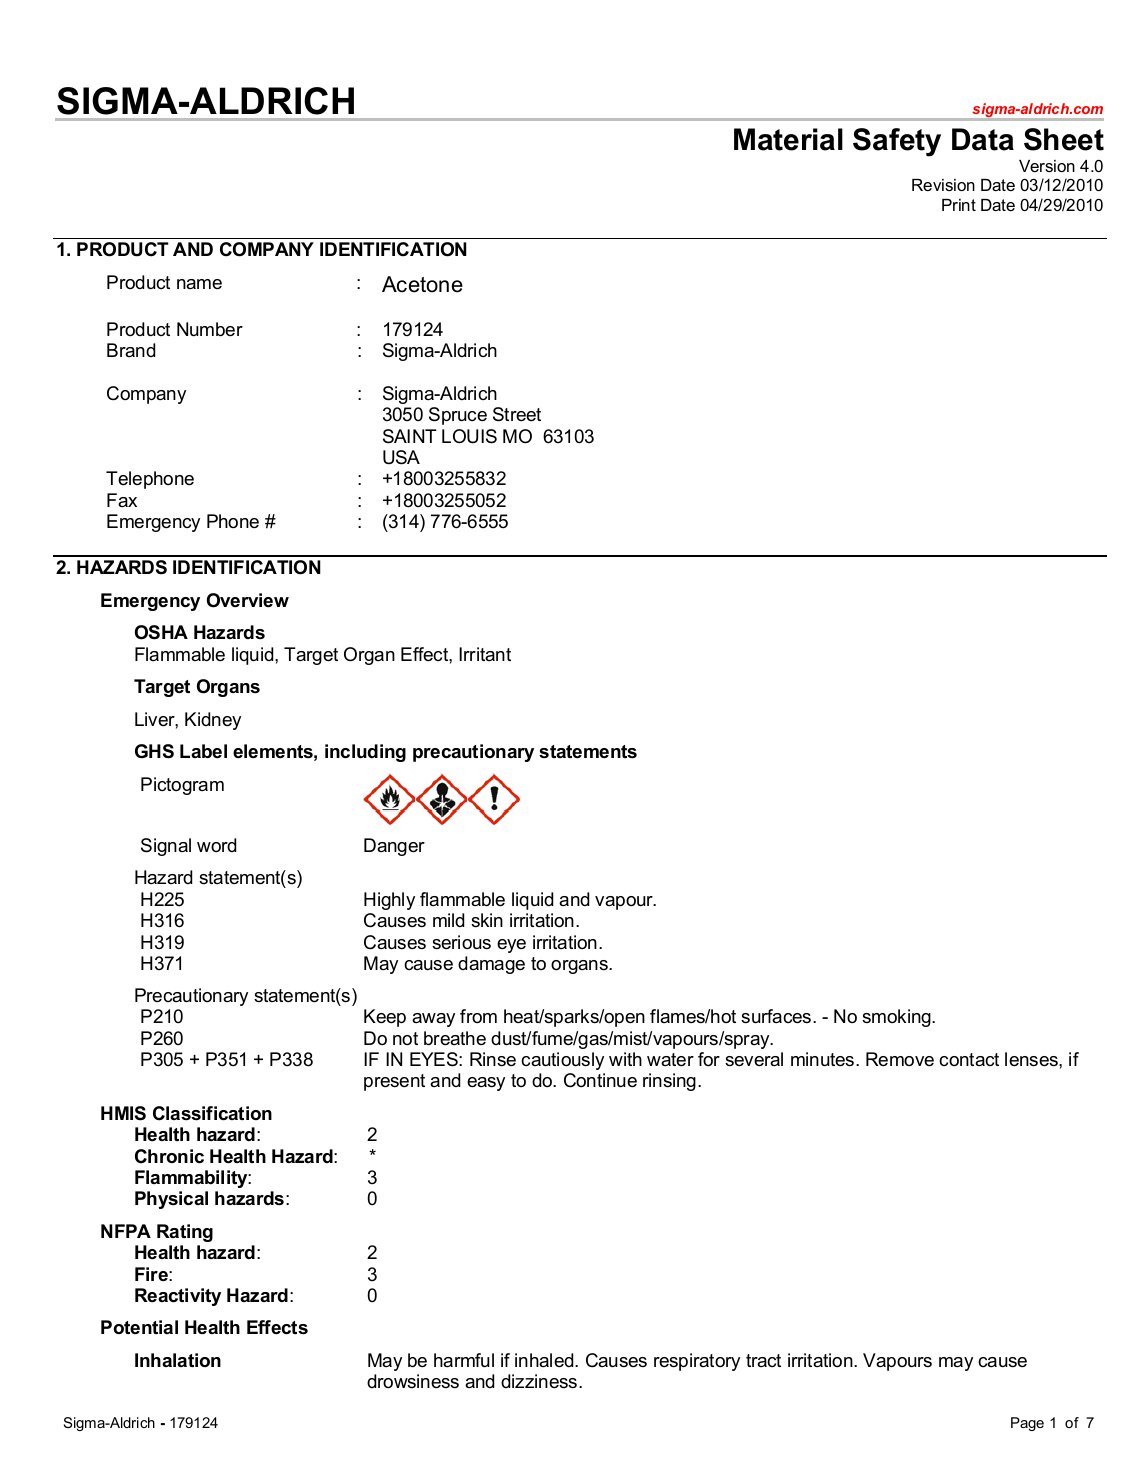 This image depicts a sample Safety Data Sheet for the company Sigma-Aldrich